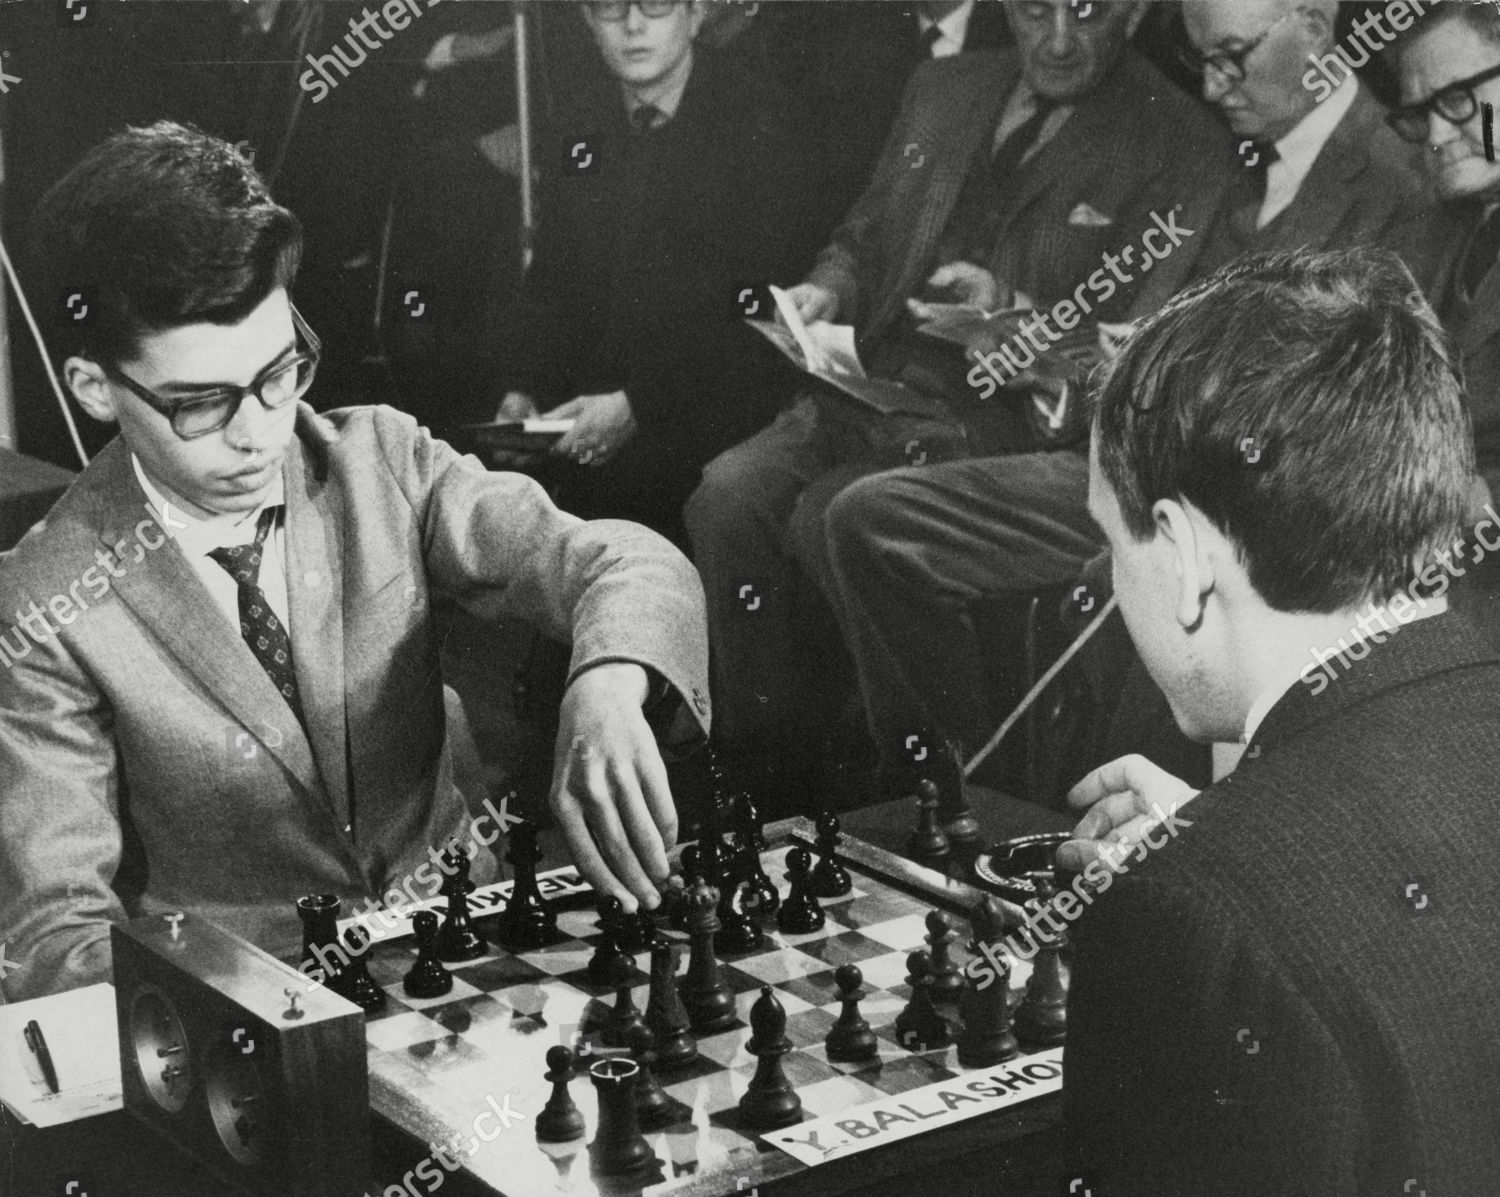 The chess games of Henrique Mecking